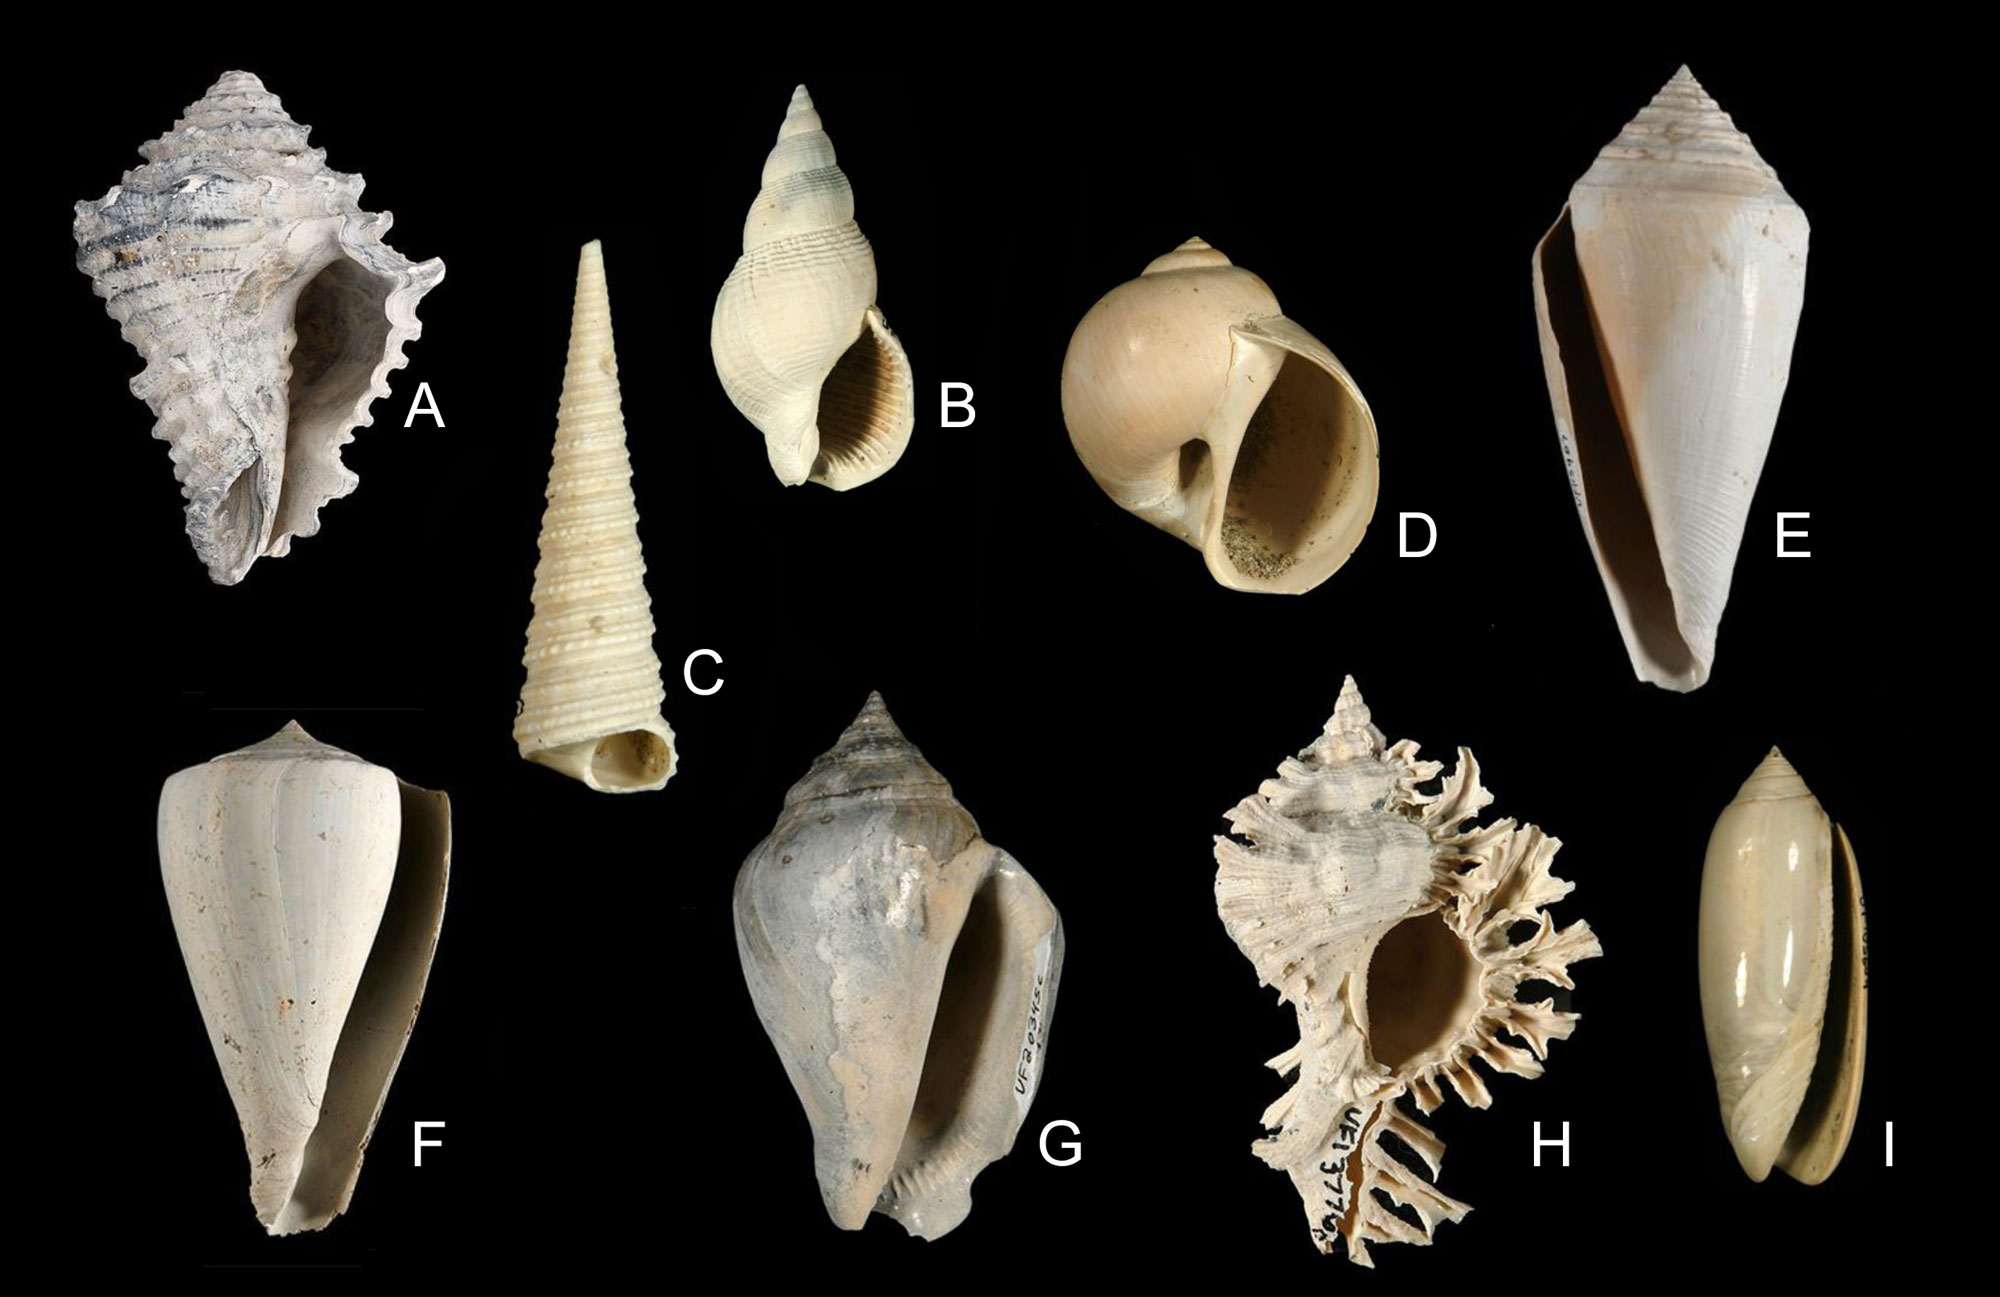 Photographic figure with images of fossil snail shells from the Pliocene to Pleistocene of Florida and the Carolinas. Each shell is oriented so its spire is at the top of the image and its aperture is showing.